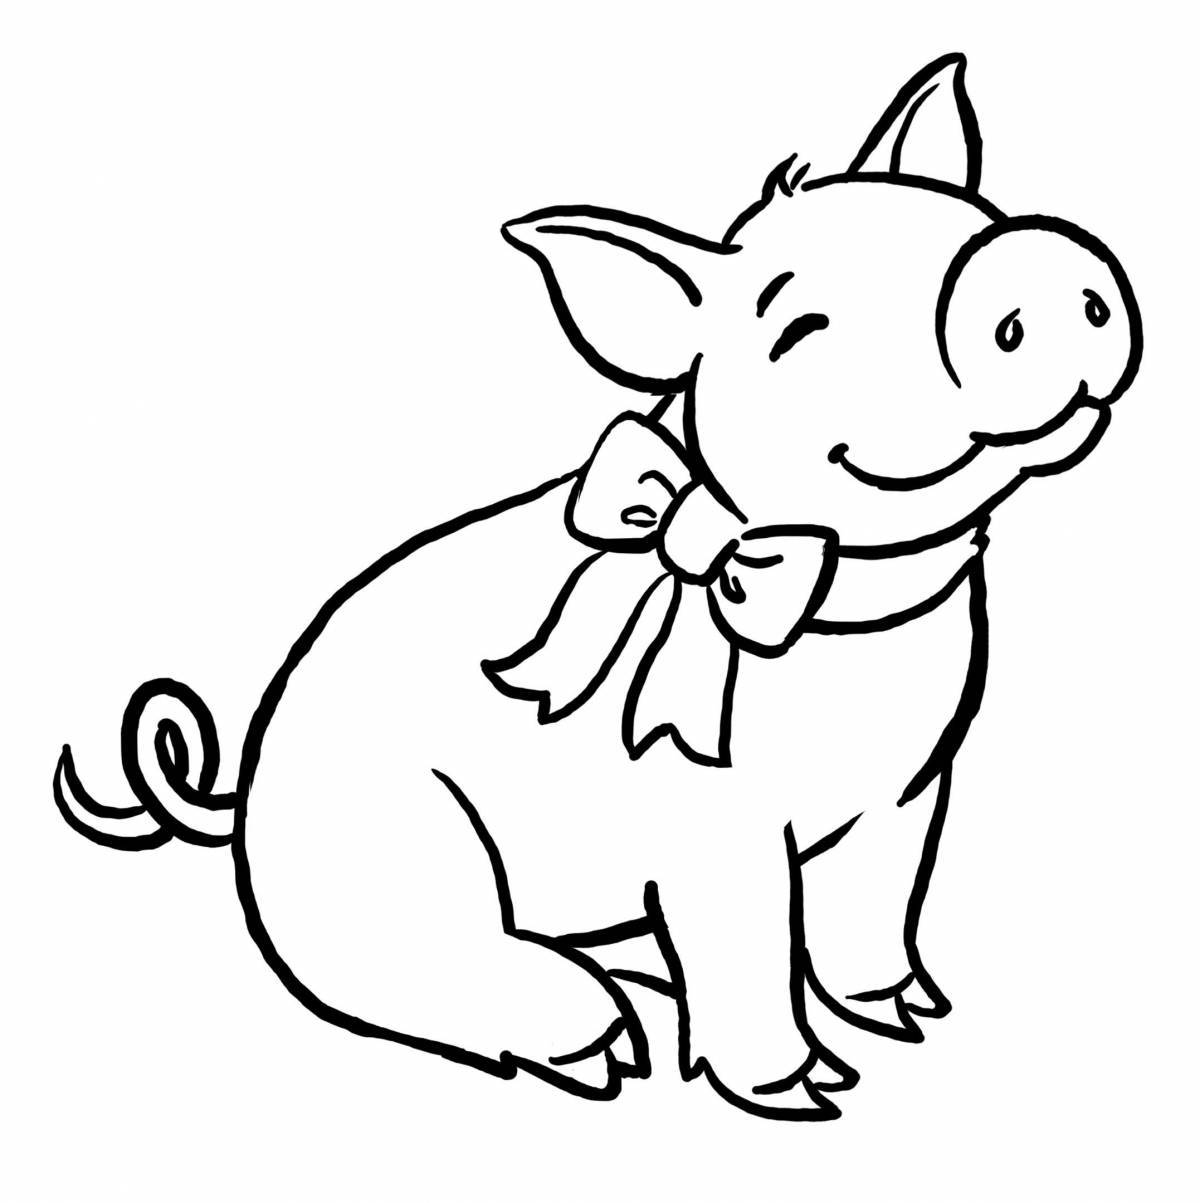 Funny pig coloring book